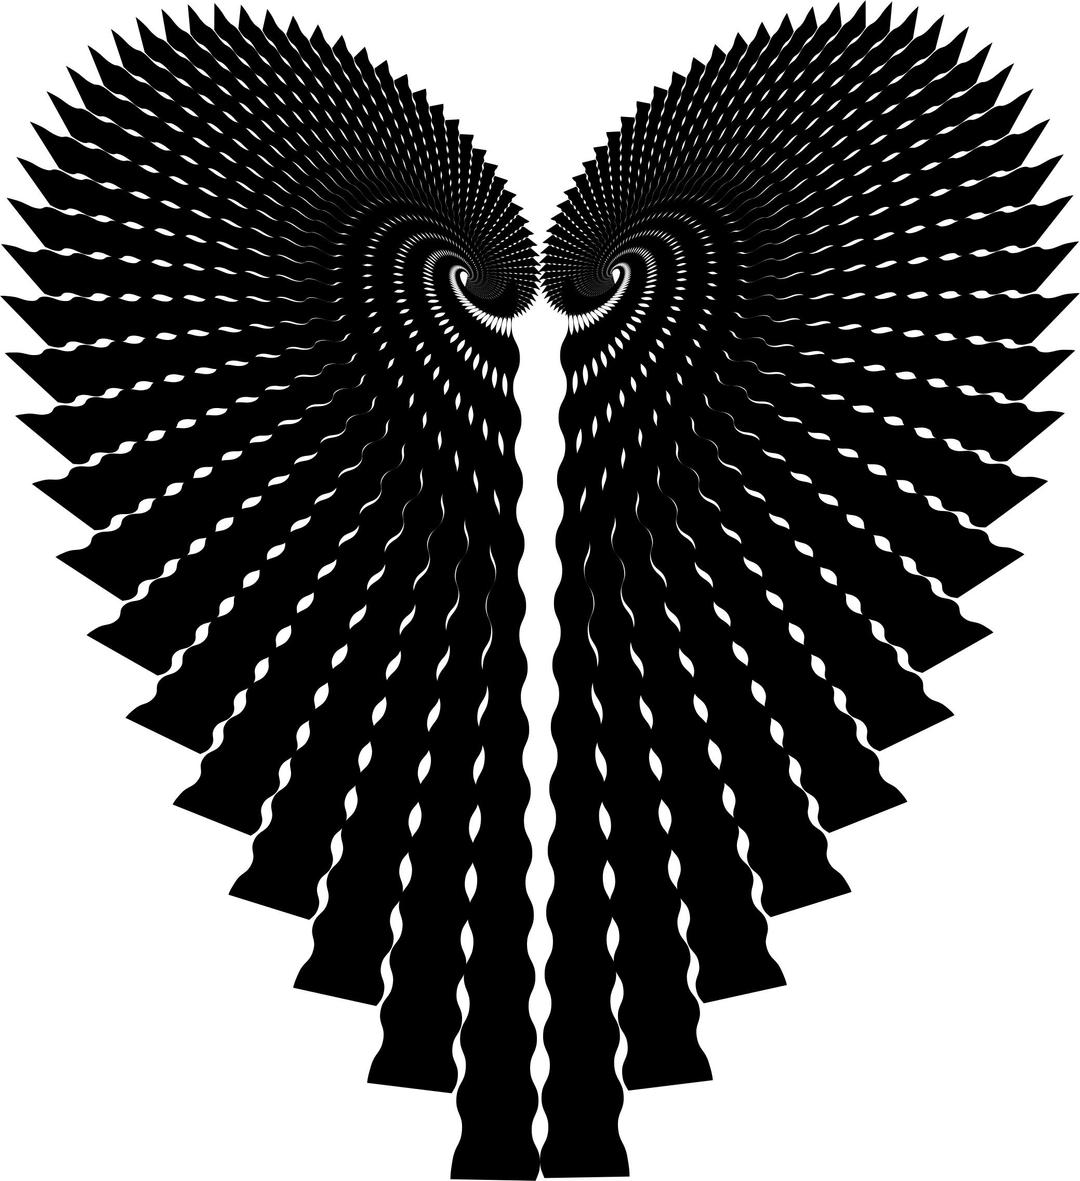 Abstract Heart Silhouette png transparent